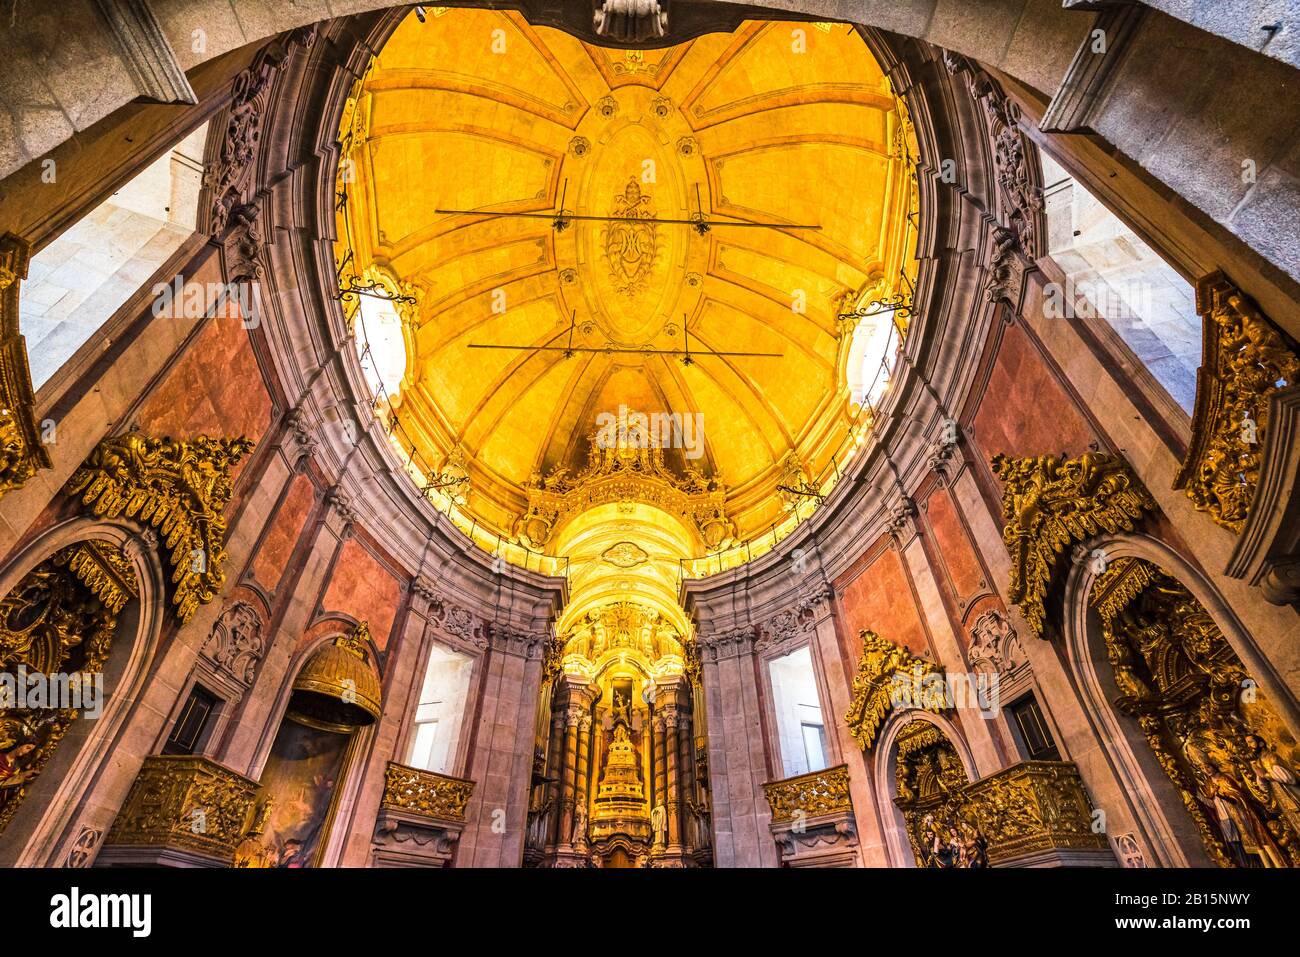 View on Igreja dos Clerigos Church Breathtaking Picturesque Interior View of the Ceiling Stock Photo